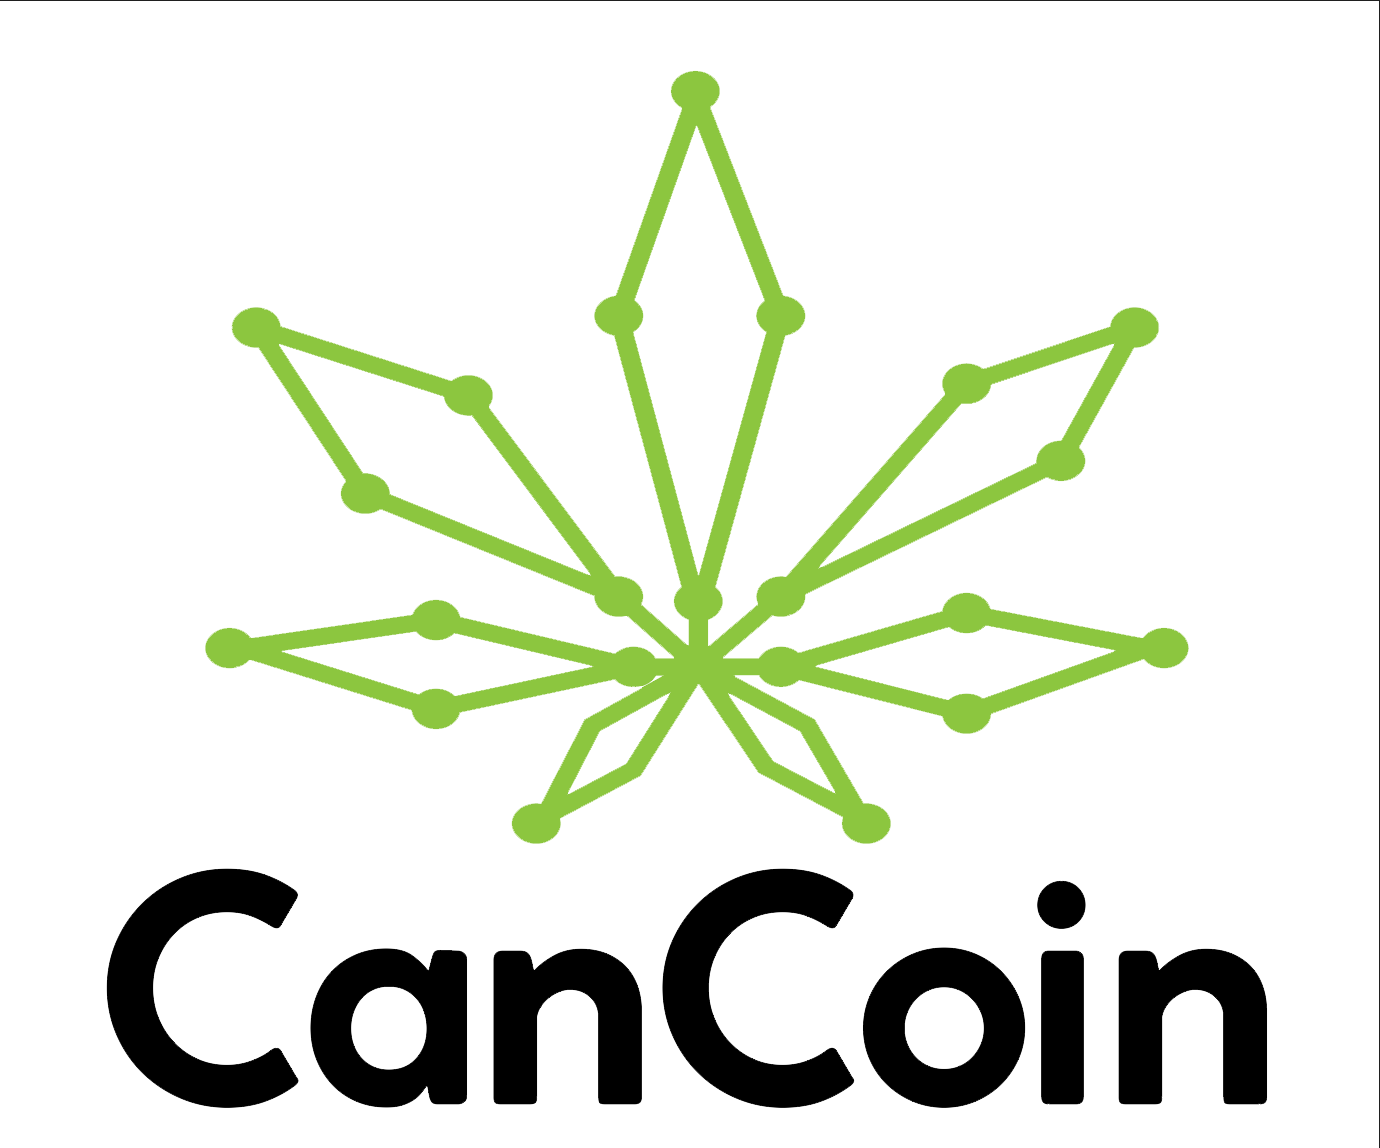 The CanCoin Announces Scott de Mercado, Co-Founder of Cannabis Delivery Sciences to its Advisory Board